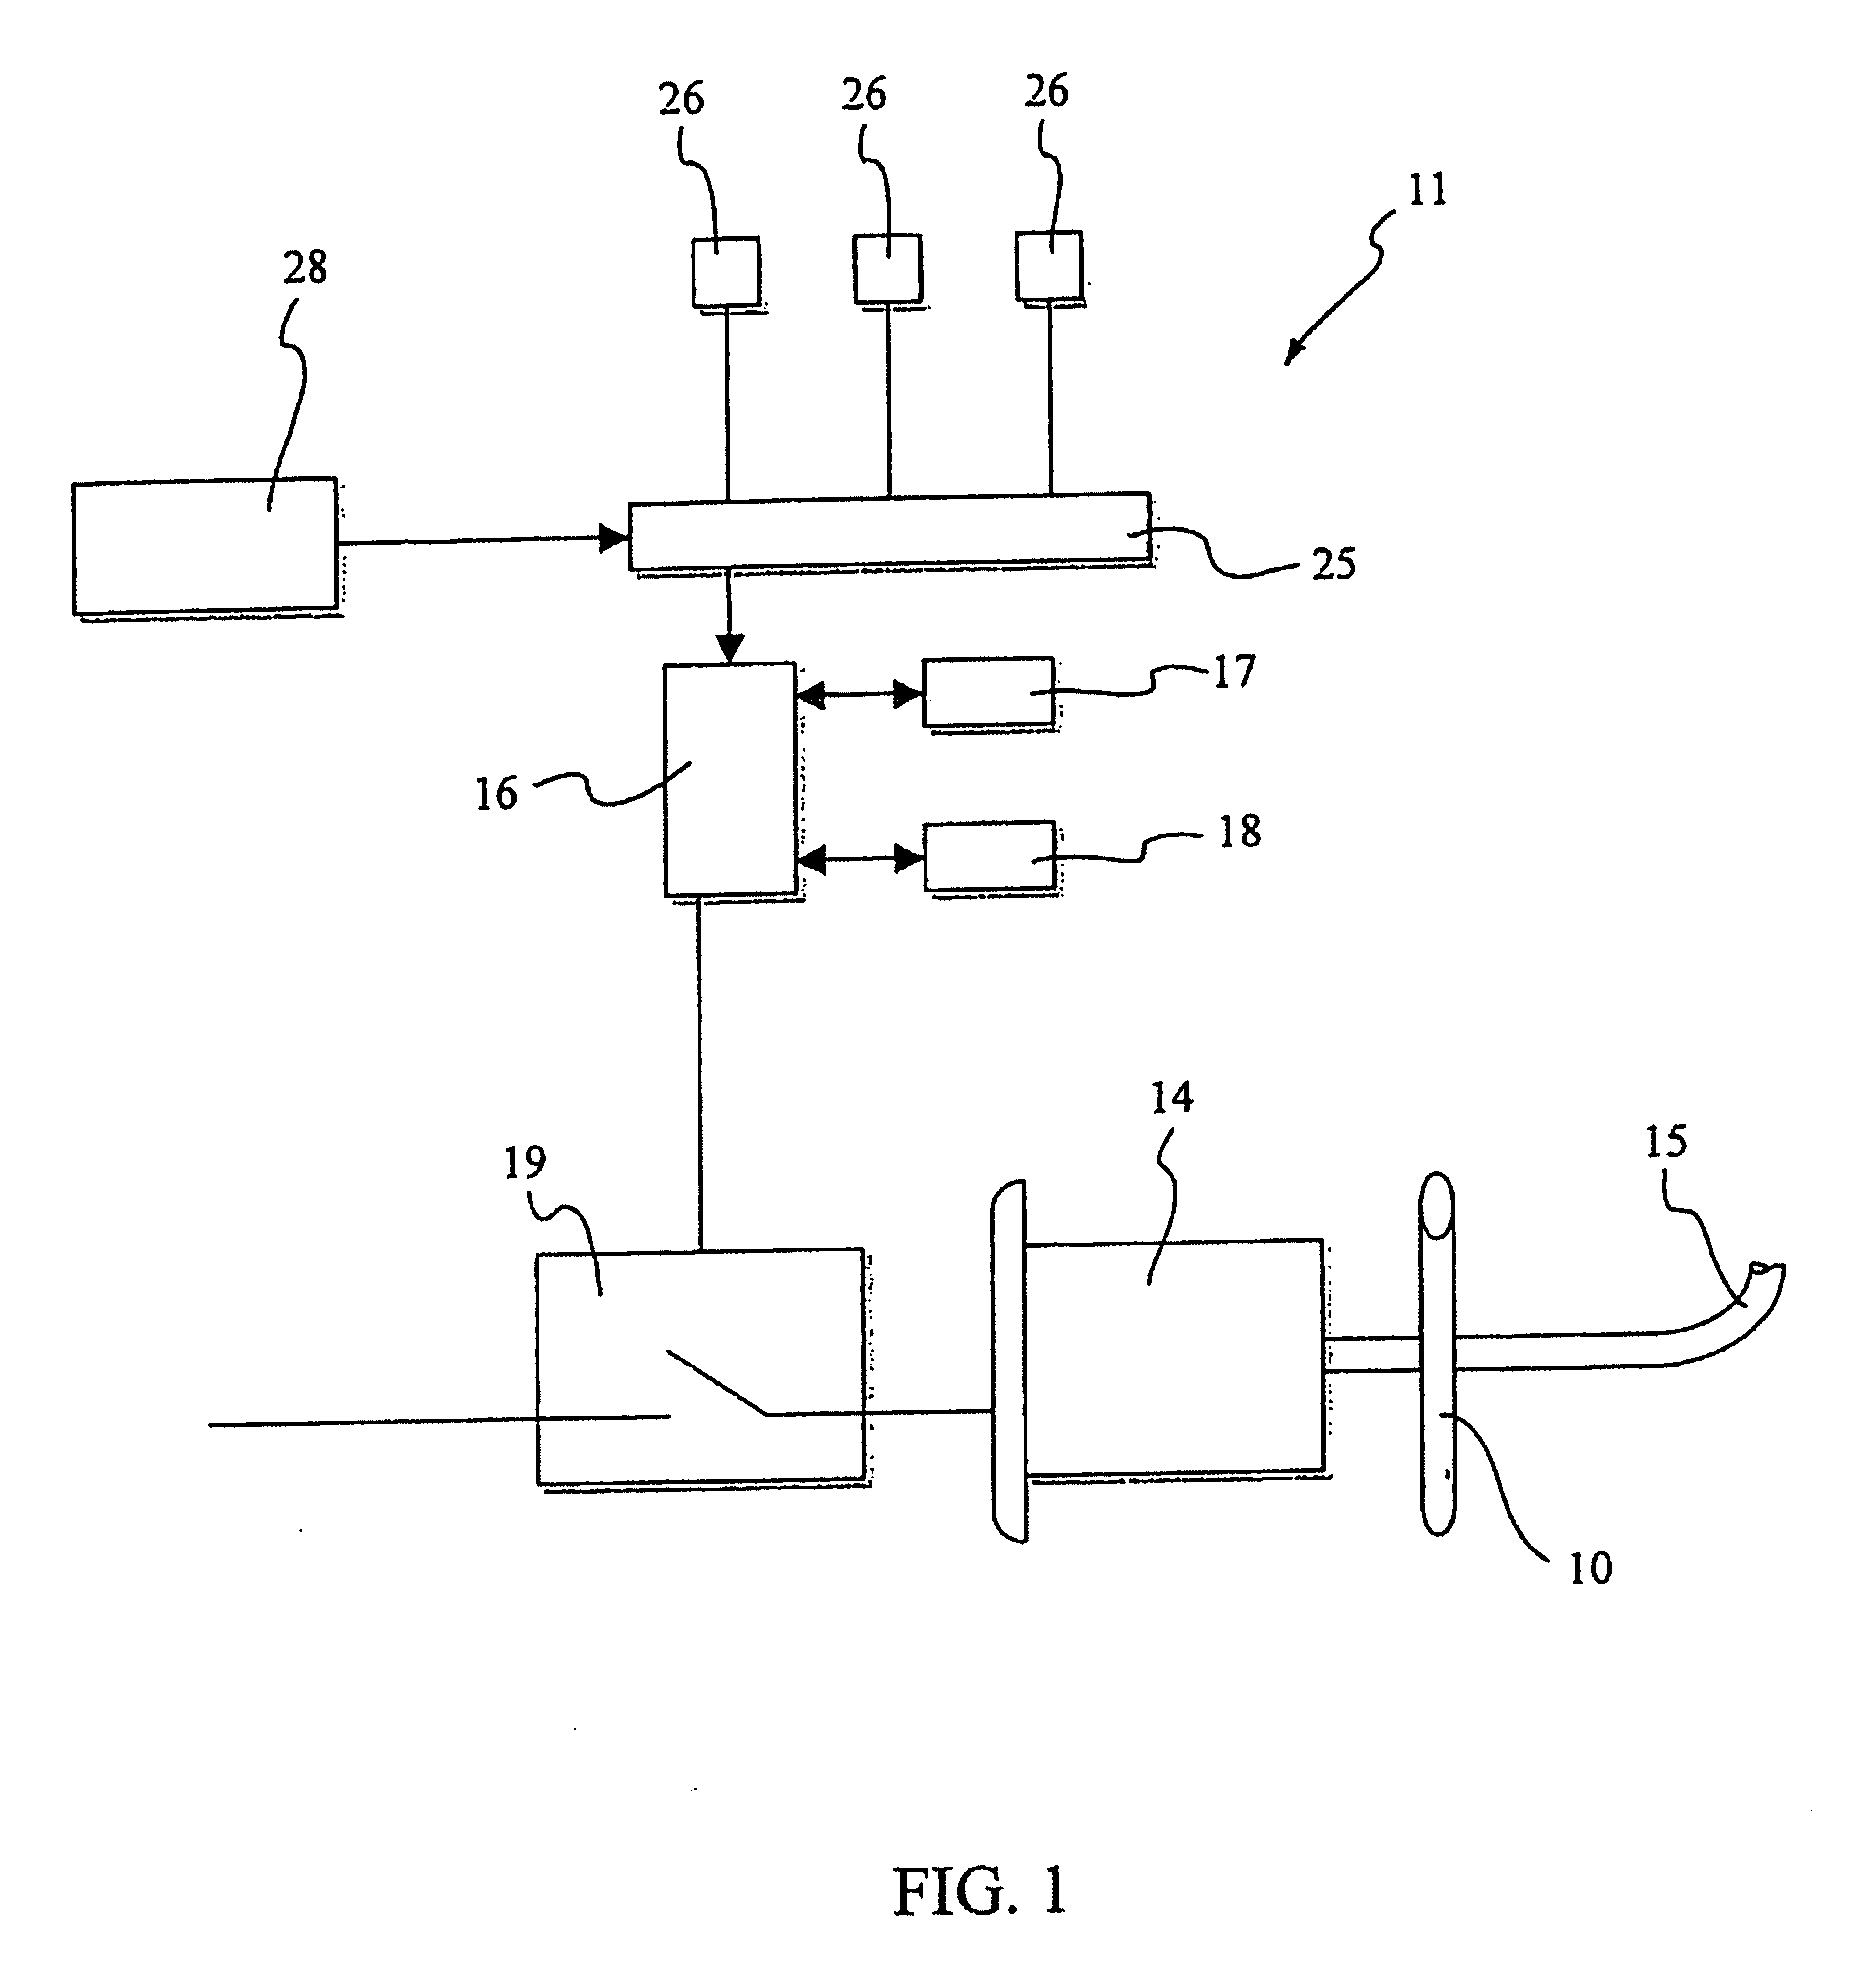 Method for driving a bidirectional motor to rotate a fluid circulation pump